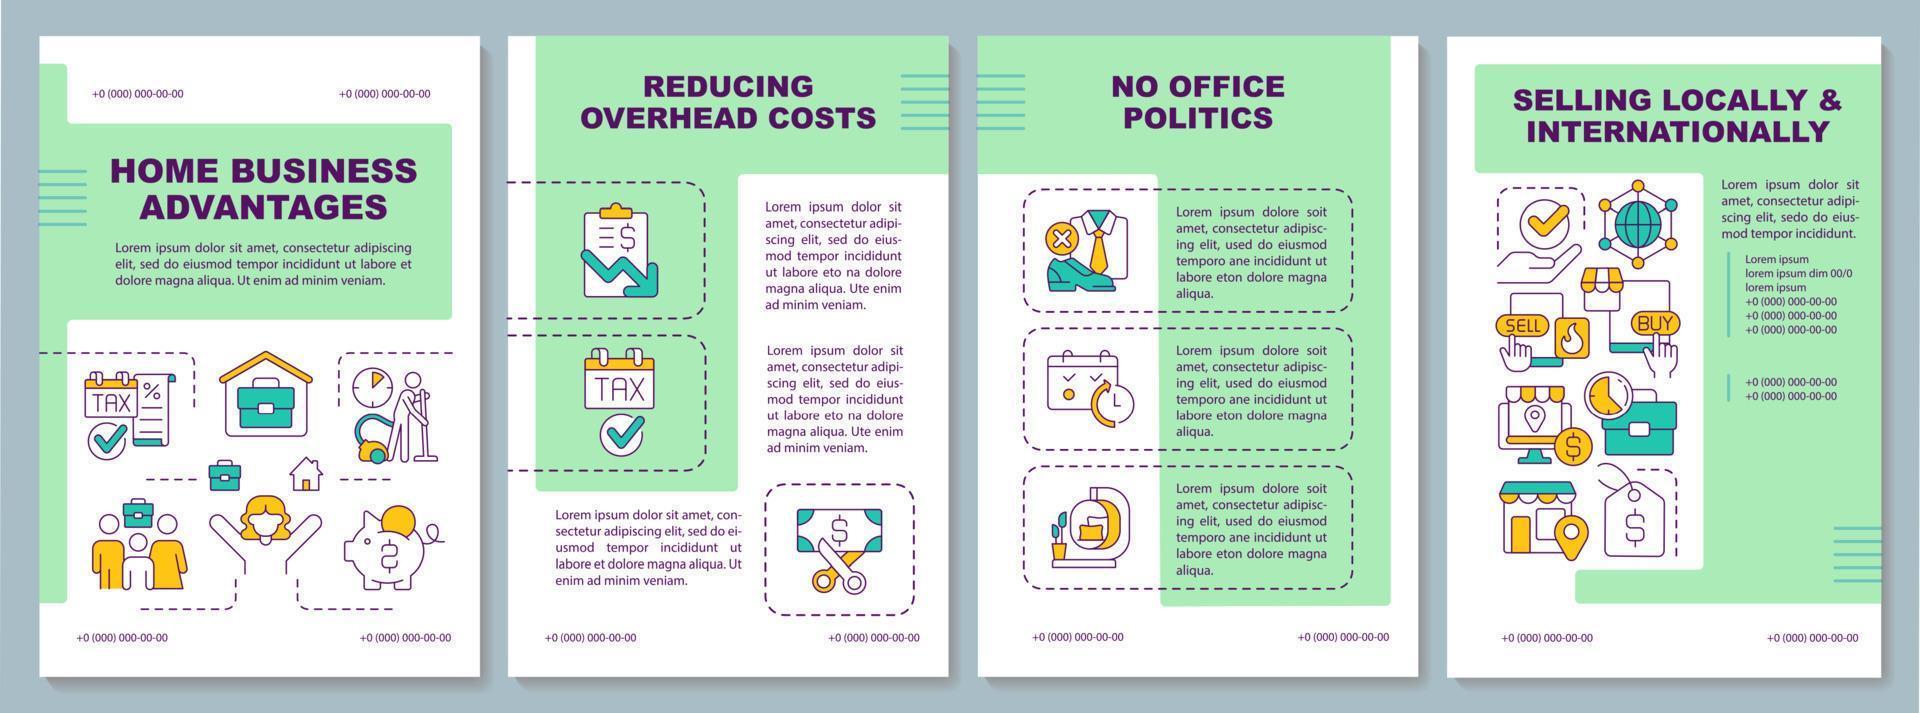 Home based business benefits brochure template. Working remotely convenience. Leaflet design with linear icons. Editable 4 vector layouts for presentation, annual reports